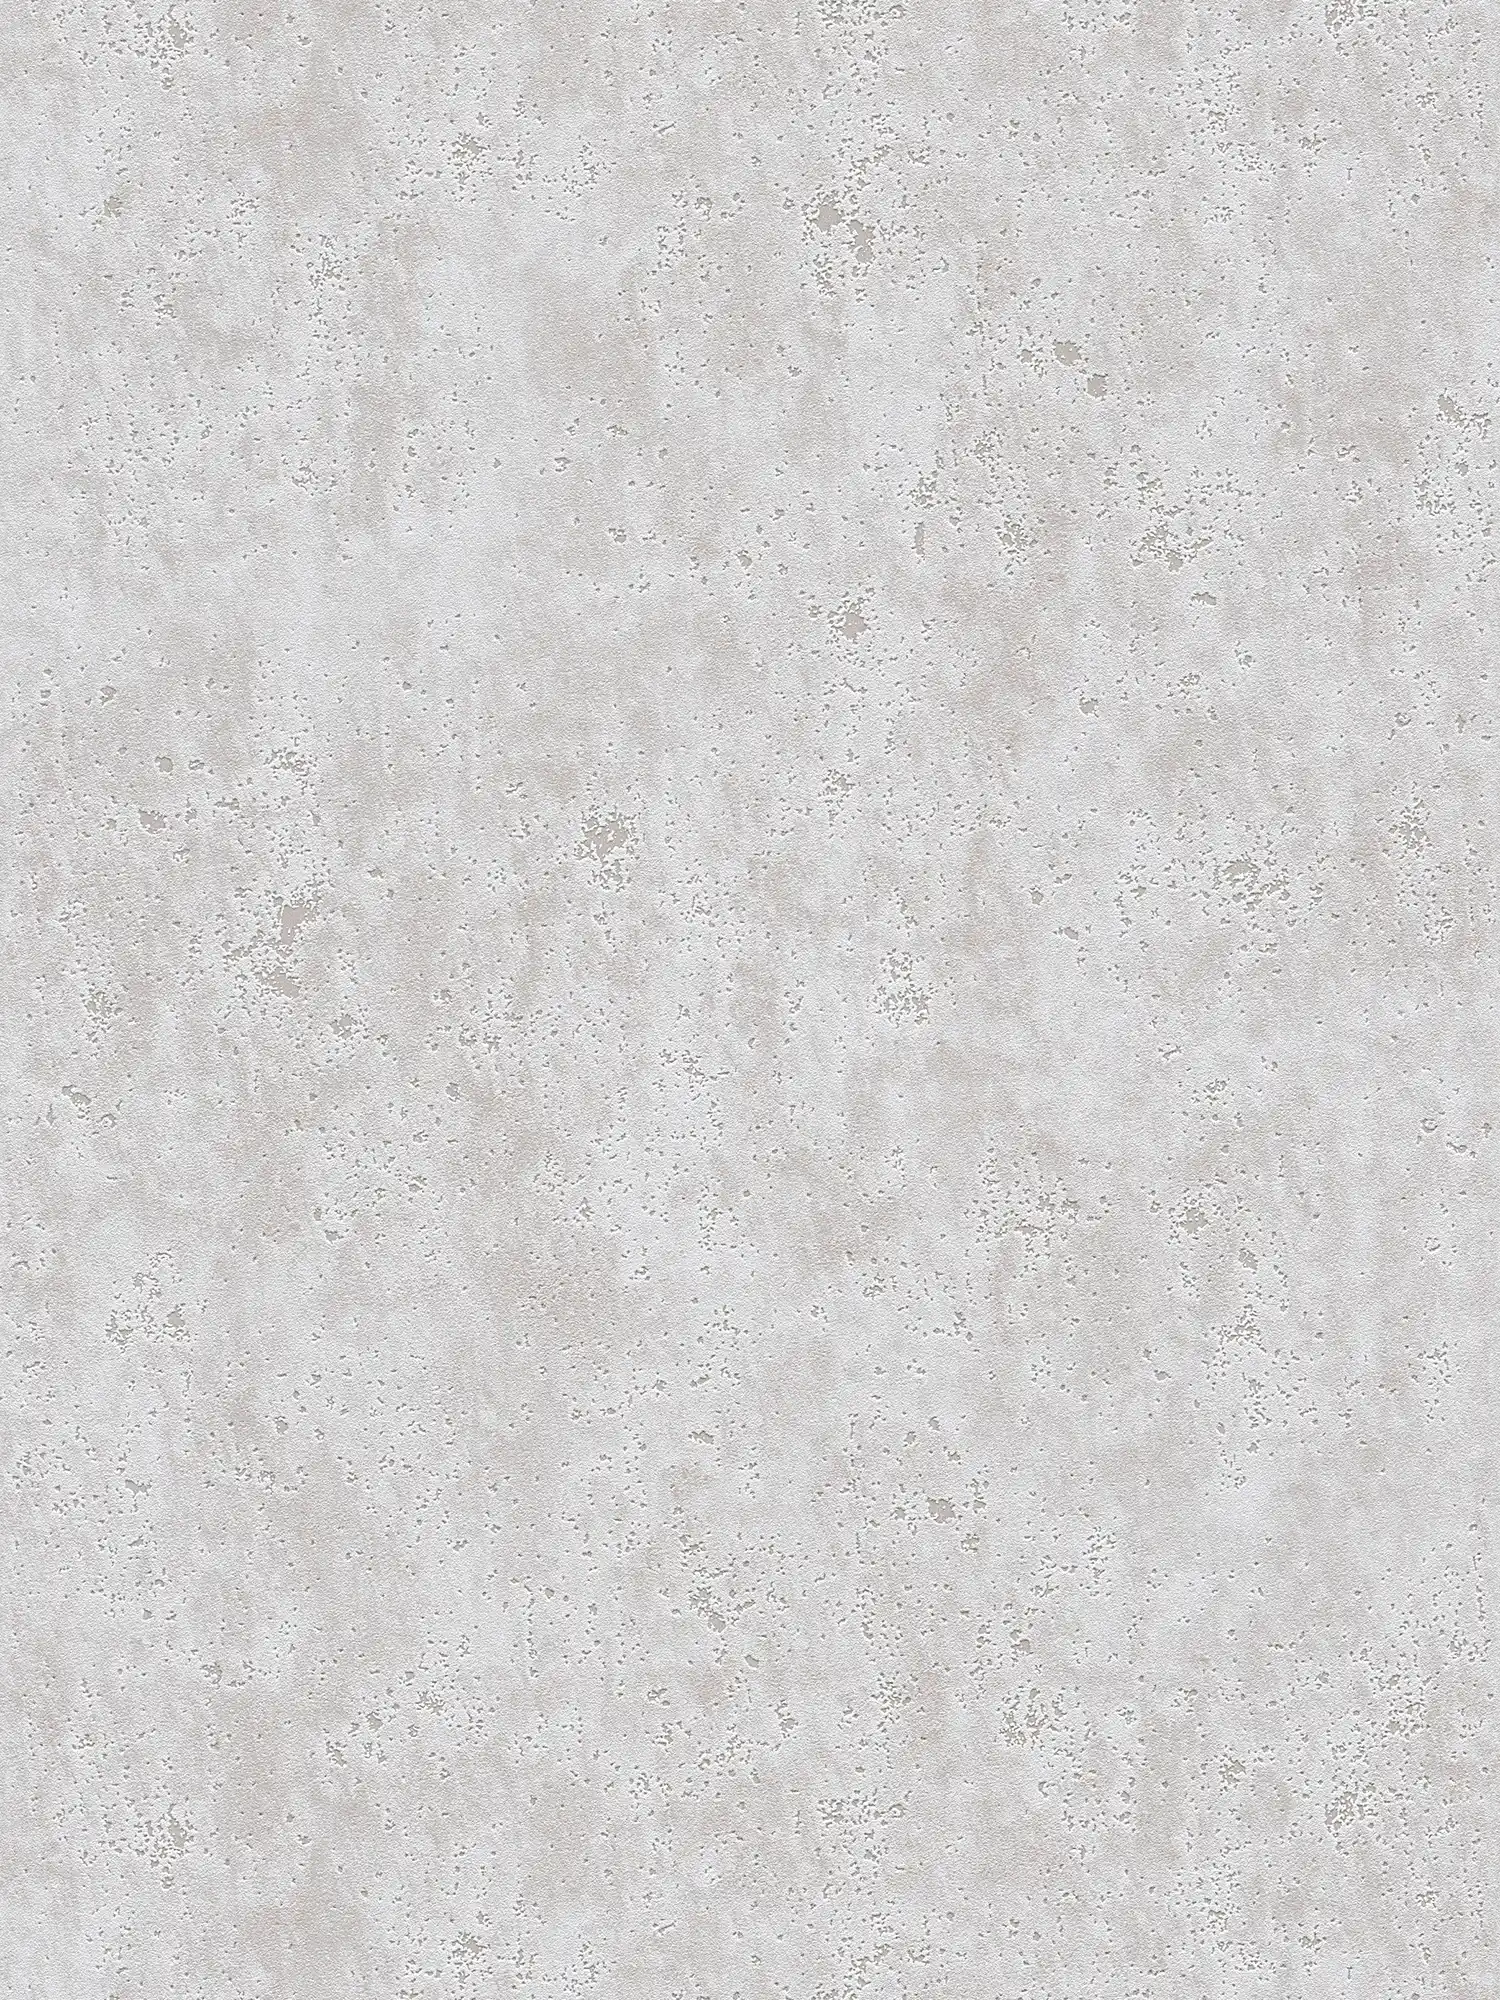 Concrete look wallpaper with colour & surface texture - grey
